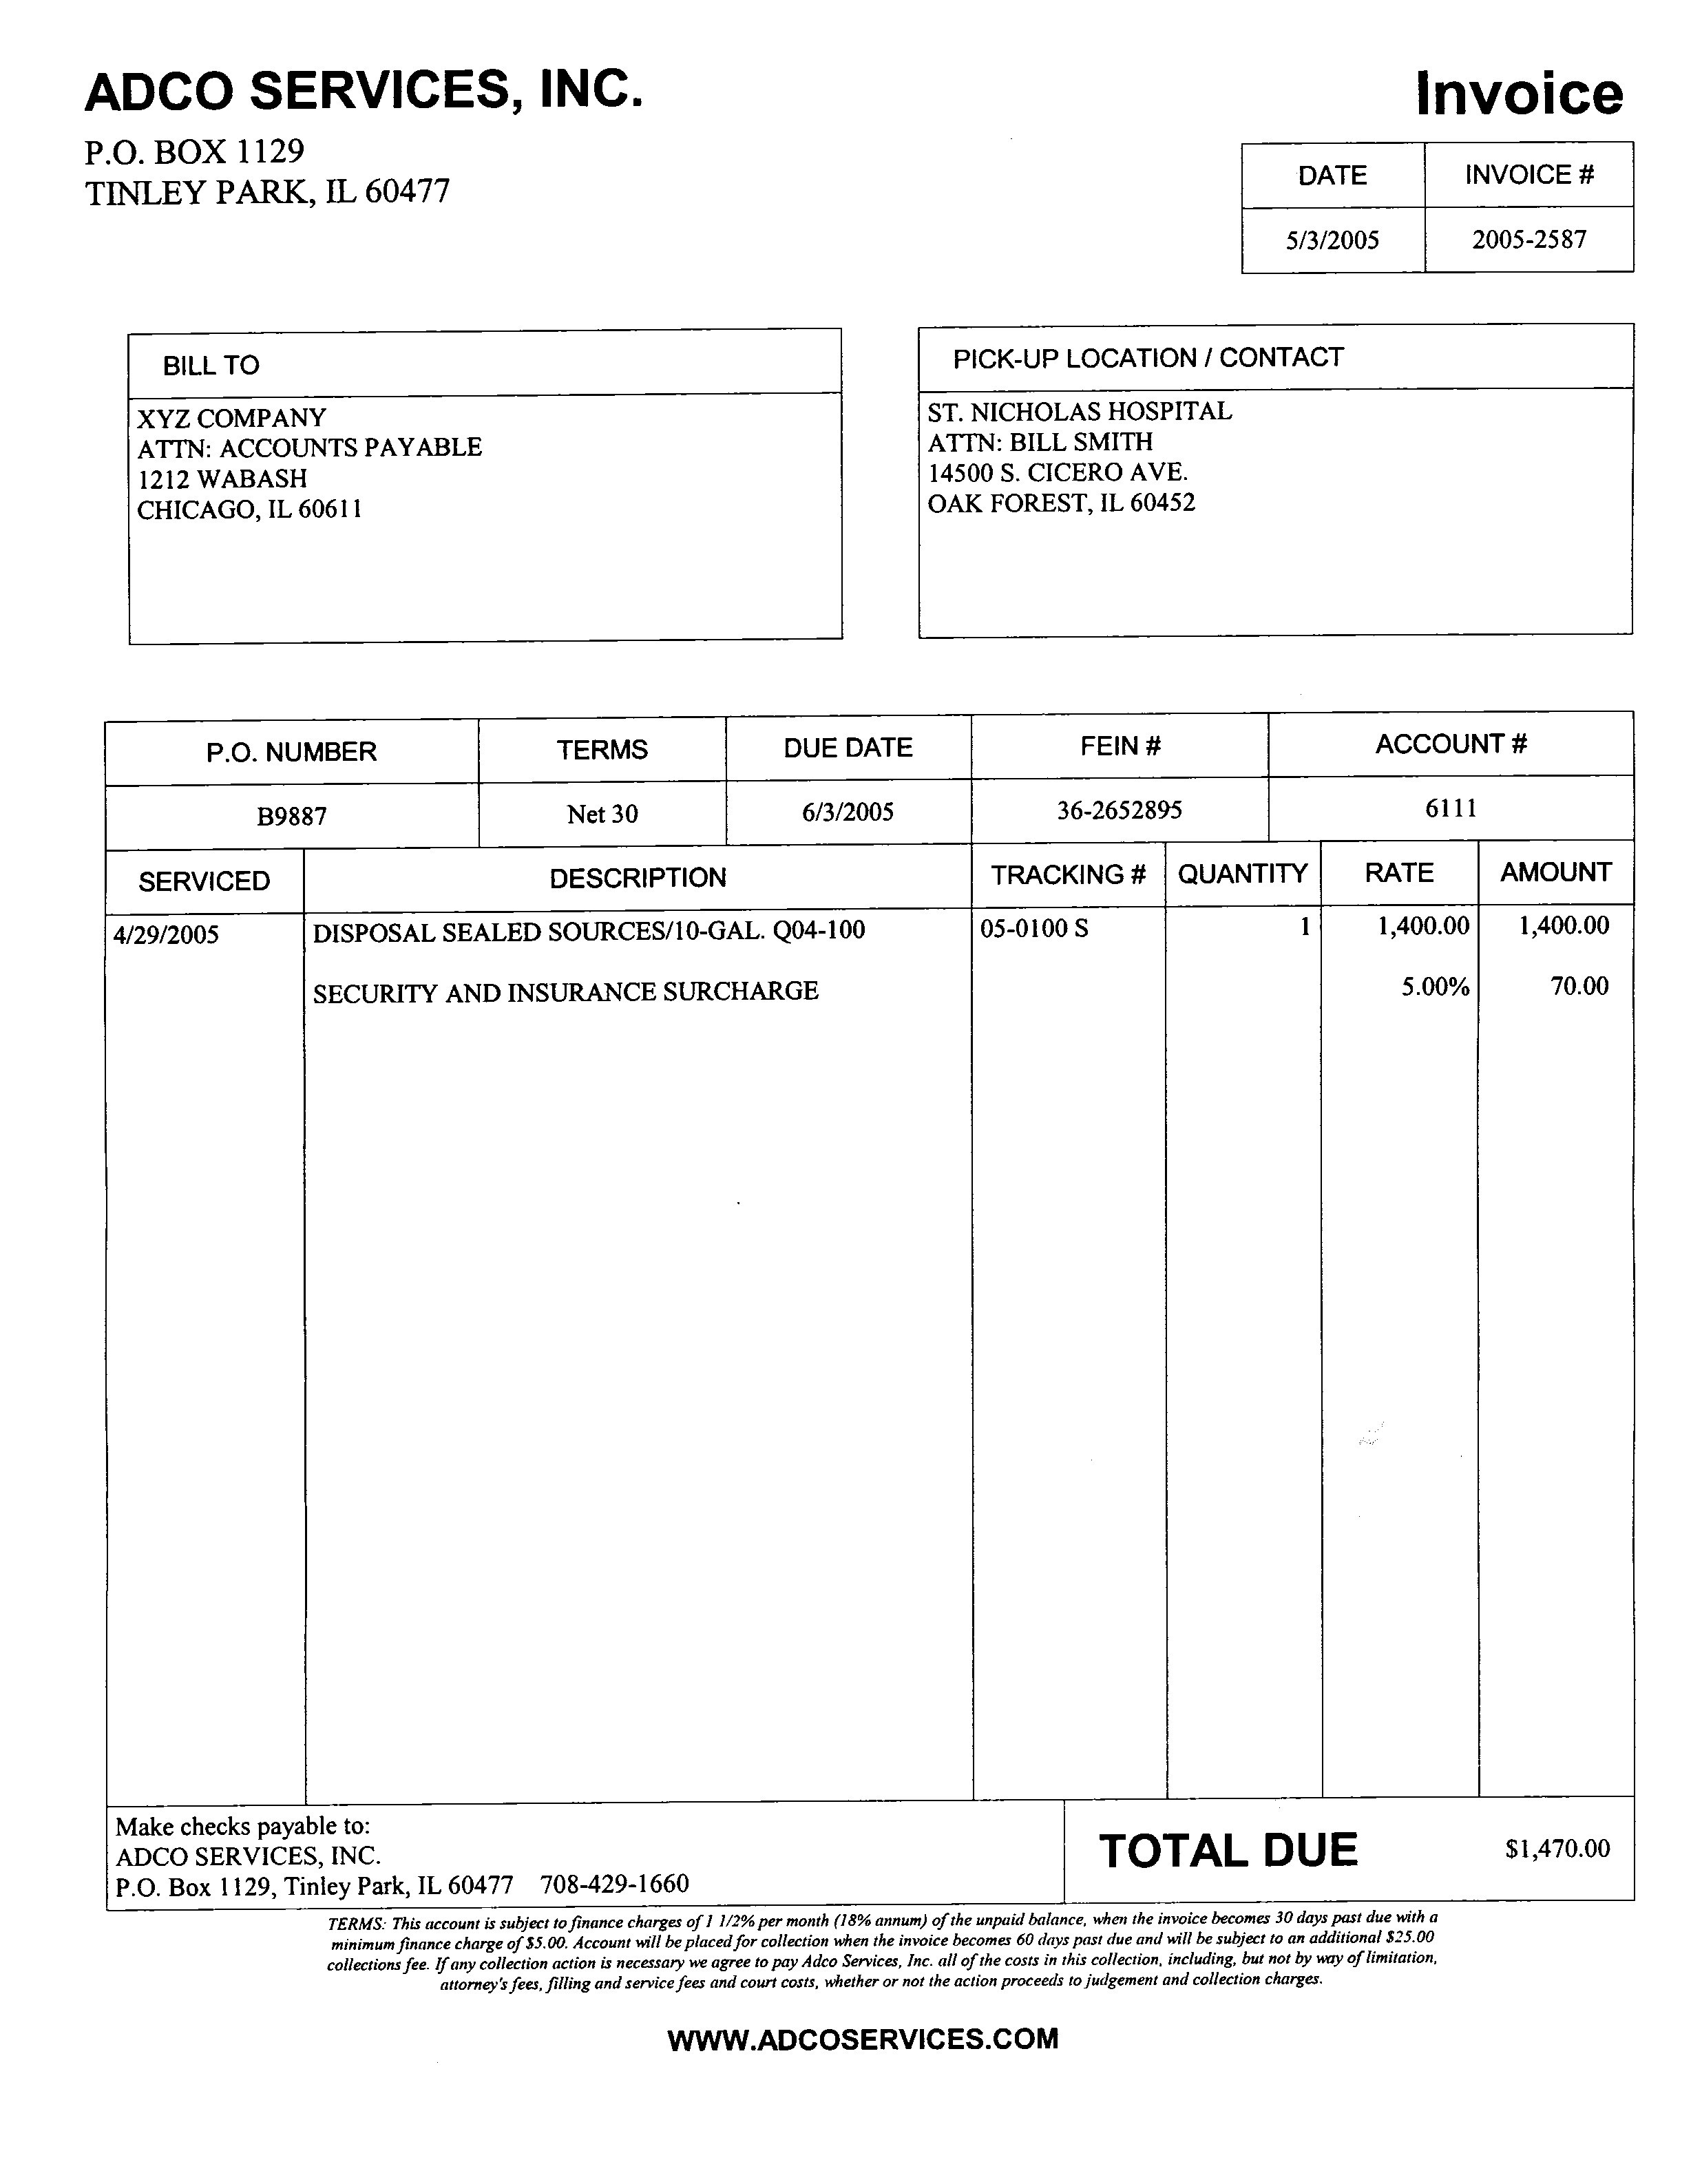 approved date site invoice